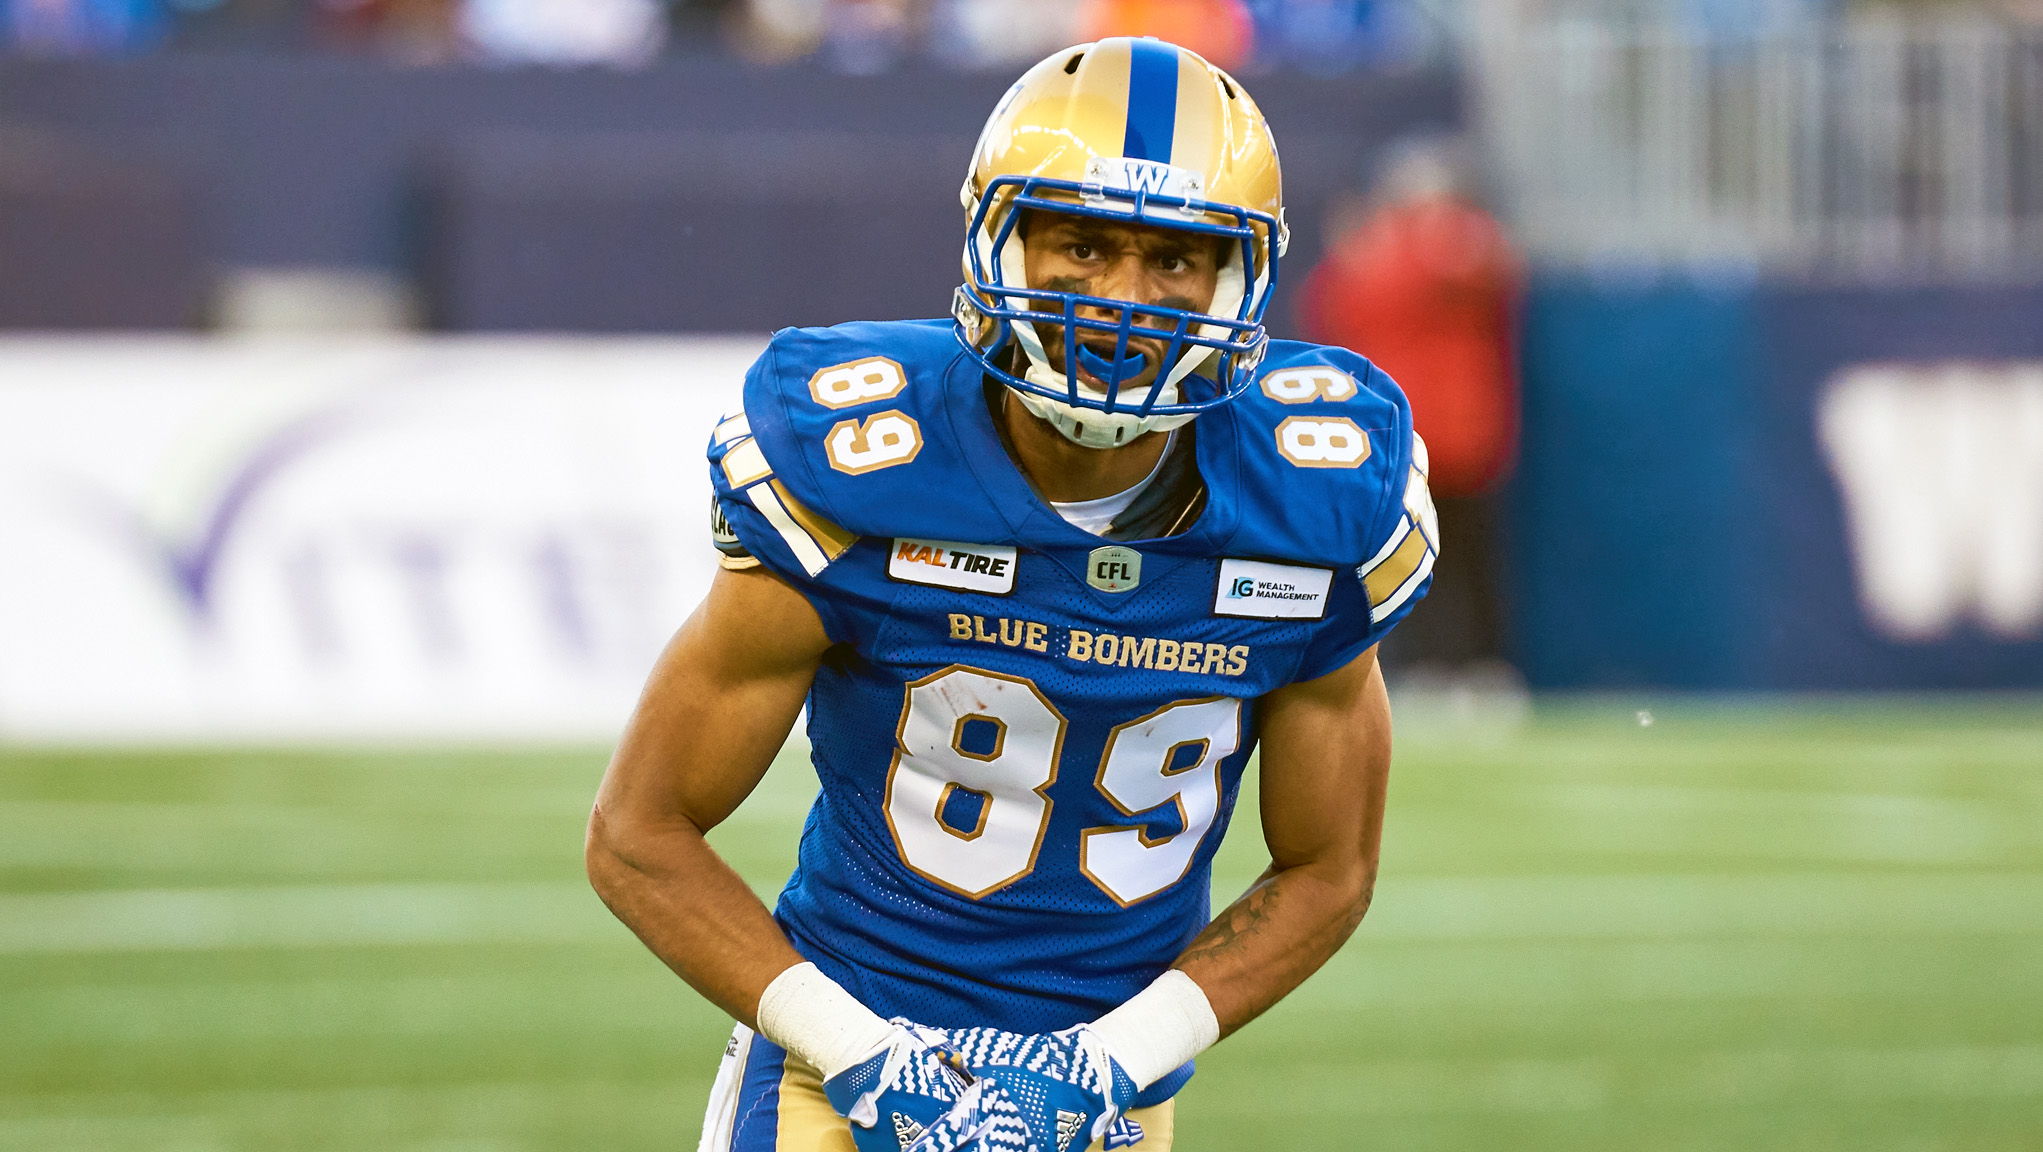 Lawler comes to Edmonton after a standout 2021 season which saw him lead the CFL in receiving yards with 1,014. Photo credit: Winnipeg Blue Bombers.